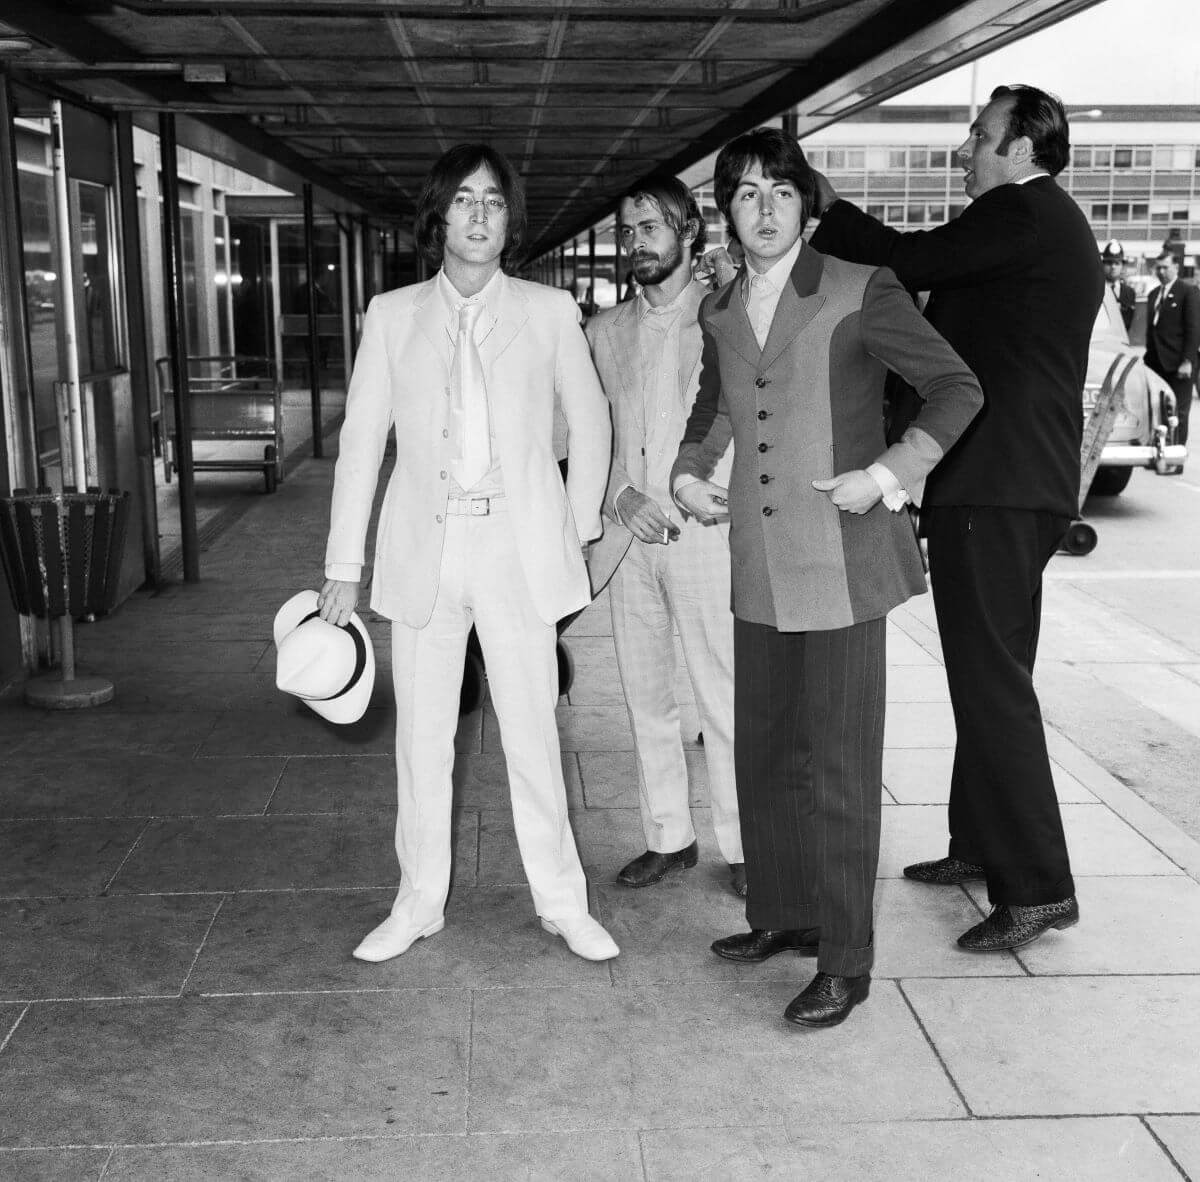 A black and white picture of John Lennon, Alex Mardas, Paul McCartney, and Les Anthony standing outside an airport. Lennon holds a hat.